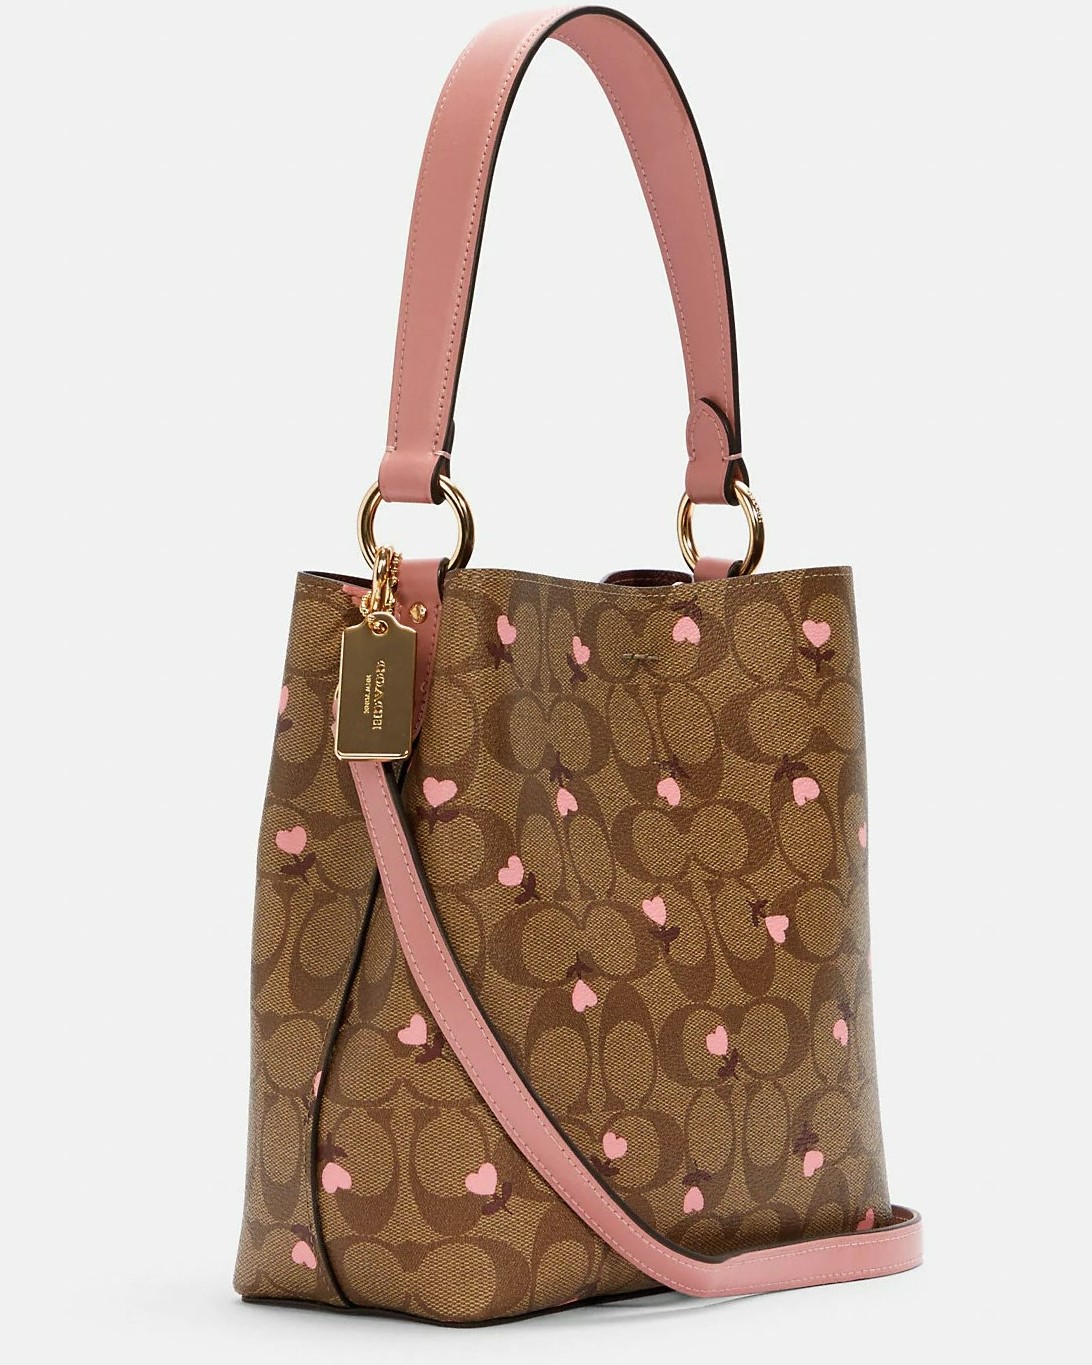 TÚI XÁCH COACH NỮ SMALL TOWN BUCKET BAG IN SIGNATURE CANVAS WITH HEART FLORAL PRINT 2